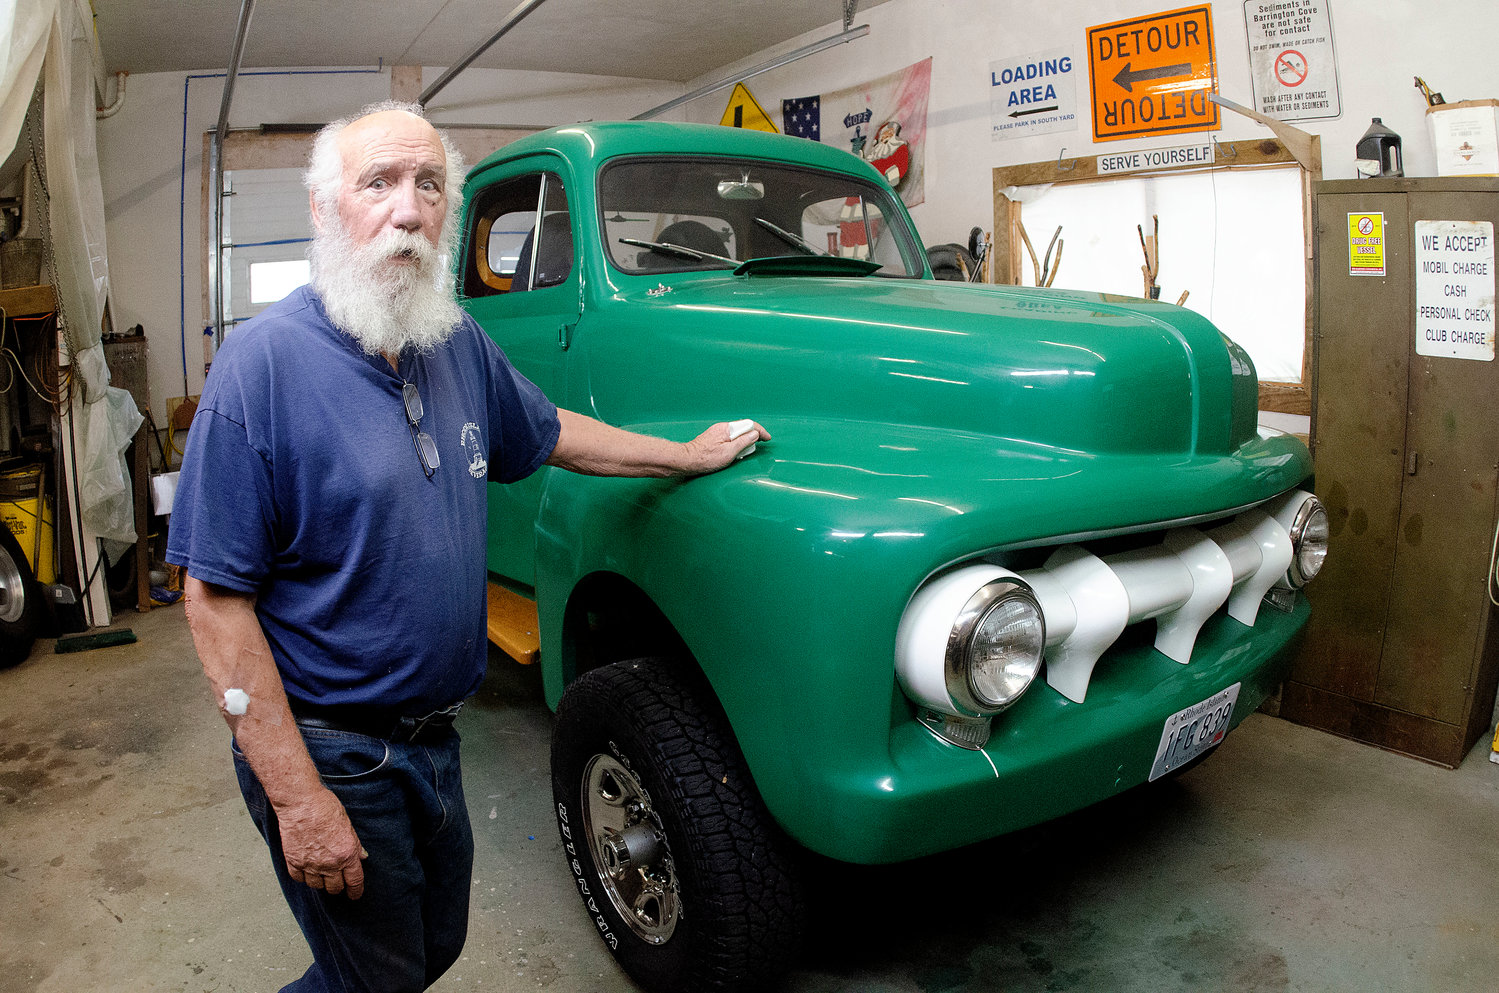 Philip Holmes, a Market Street resident of about 35 years, began work on this wholly unique truck in 2002, which includes a 1951 Ford welded to a 1983 Chevrolet 4x4 frame.